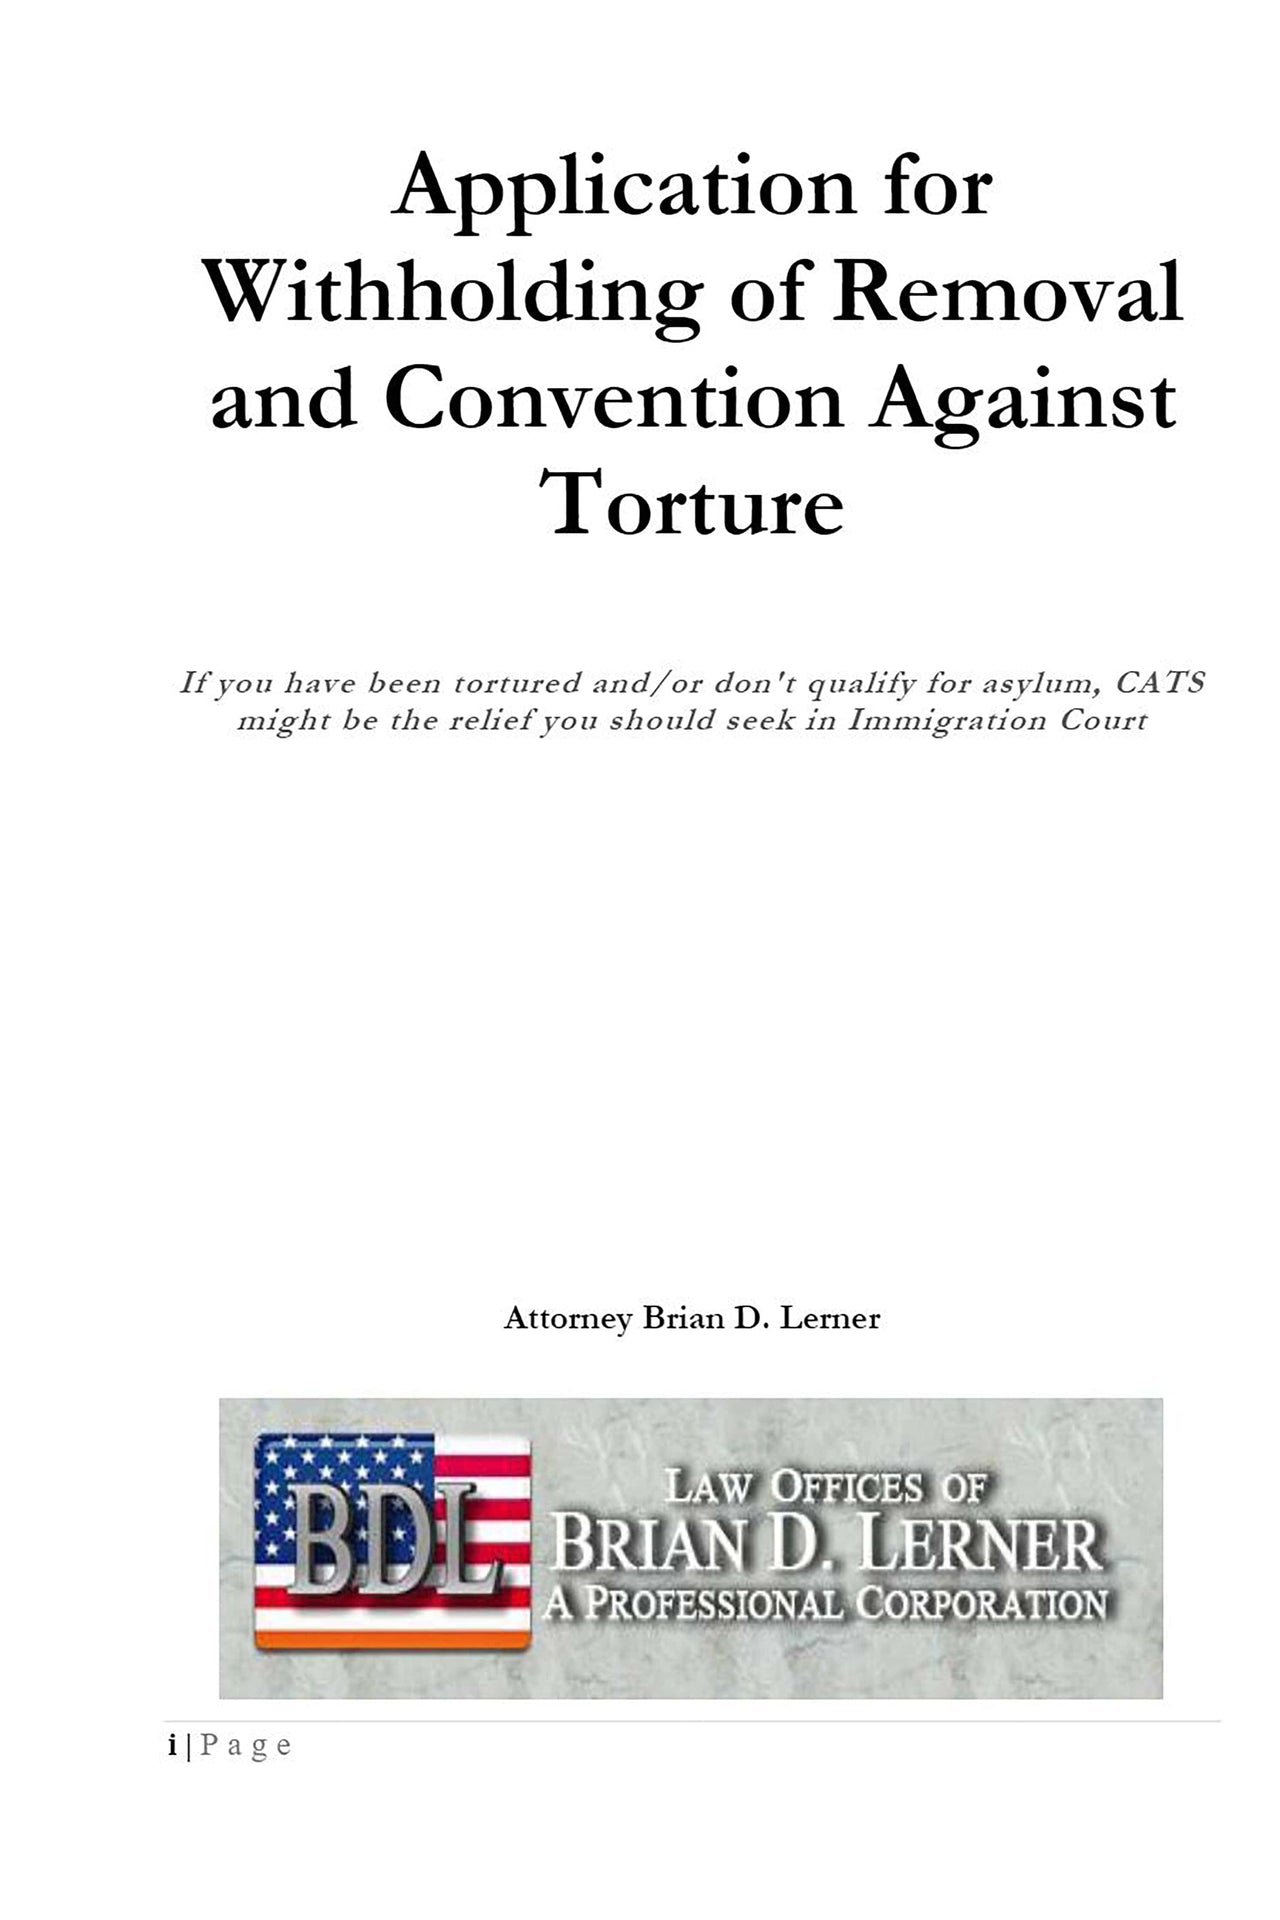 Rocket Immigration Petitions Asylum Application for Withholding of Removal and Convention Against Torture